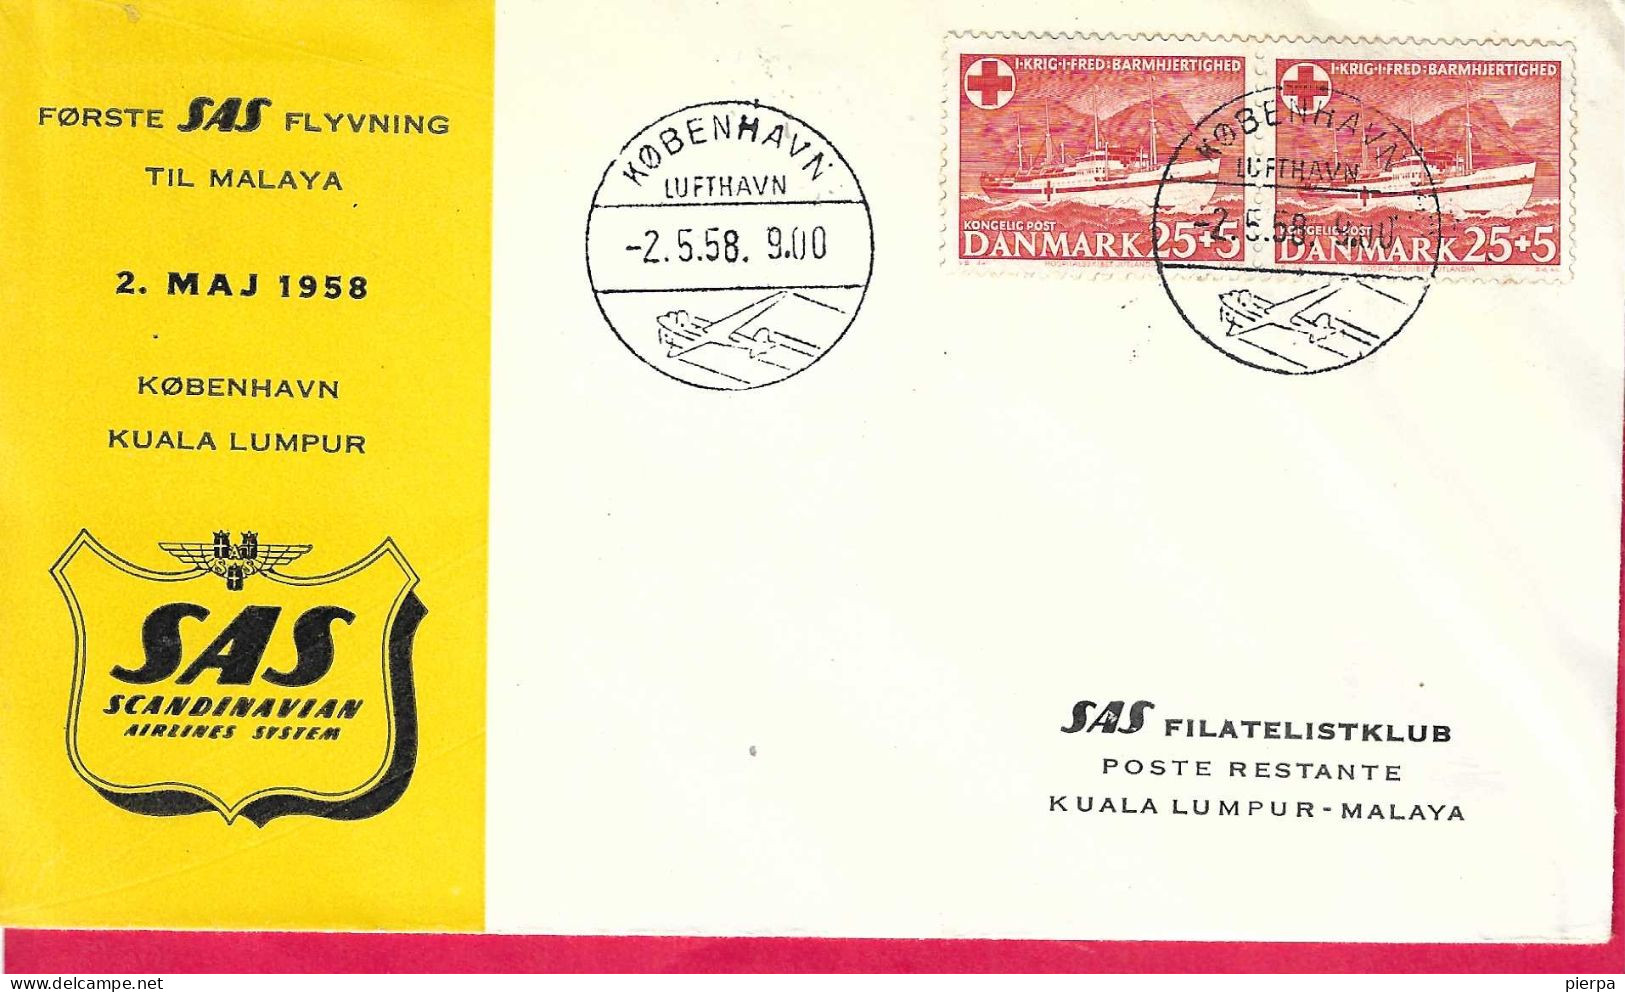 DANMARK - FIRST SAS FLIGHT FROM KOBENHAVN TO KUALA LUMPUR *2.5.58* ON OFFICIAL COVER - Airmail